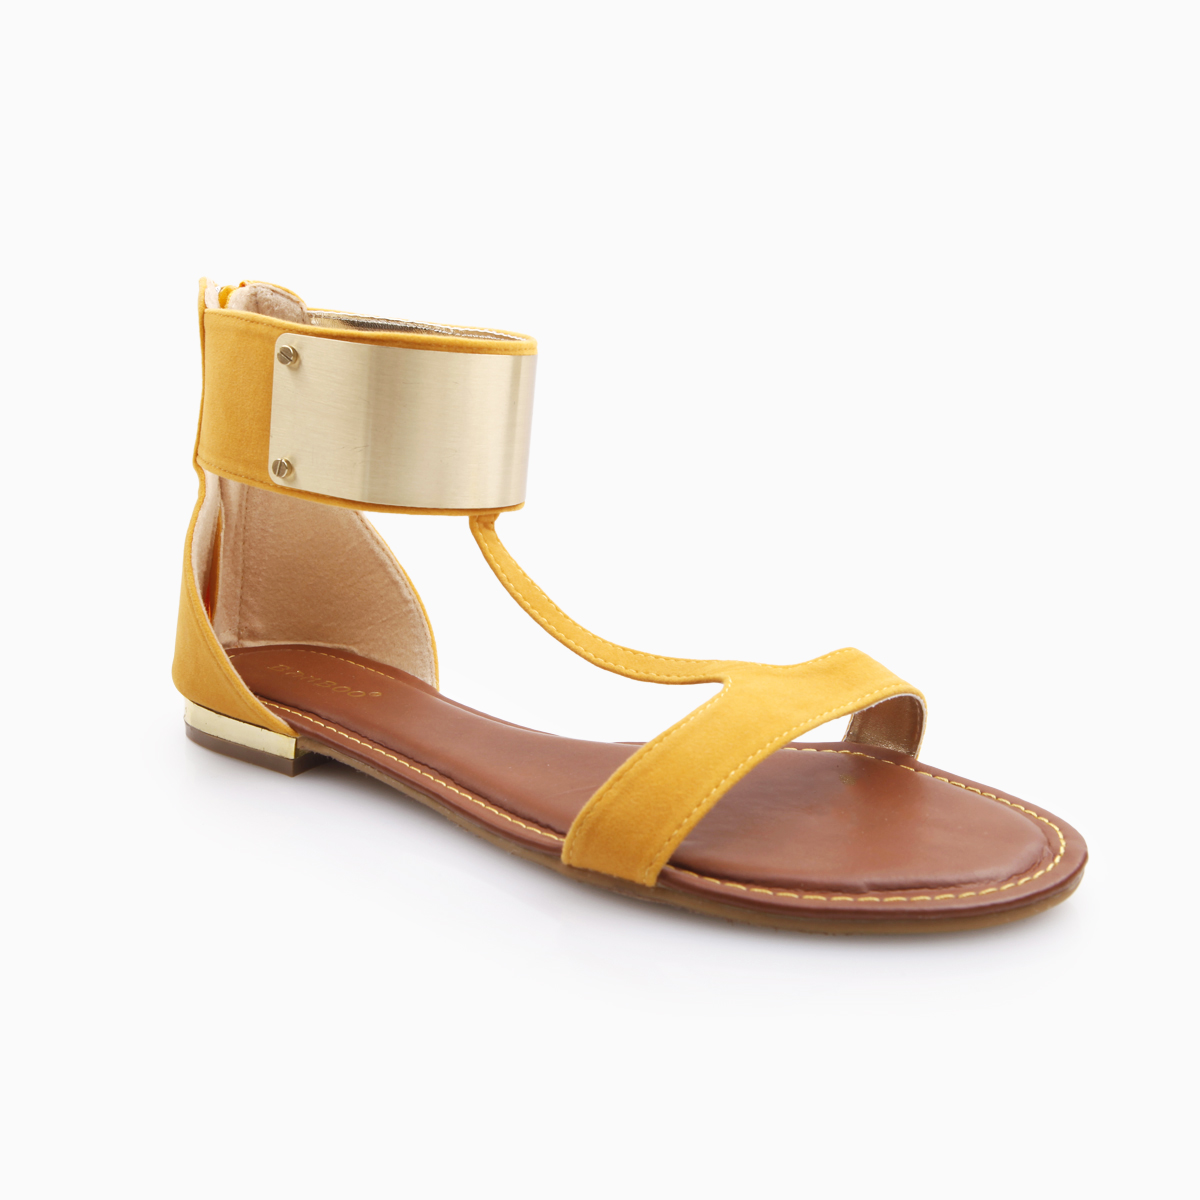 Gold Plate Sandals by Bamboo